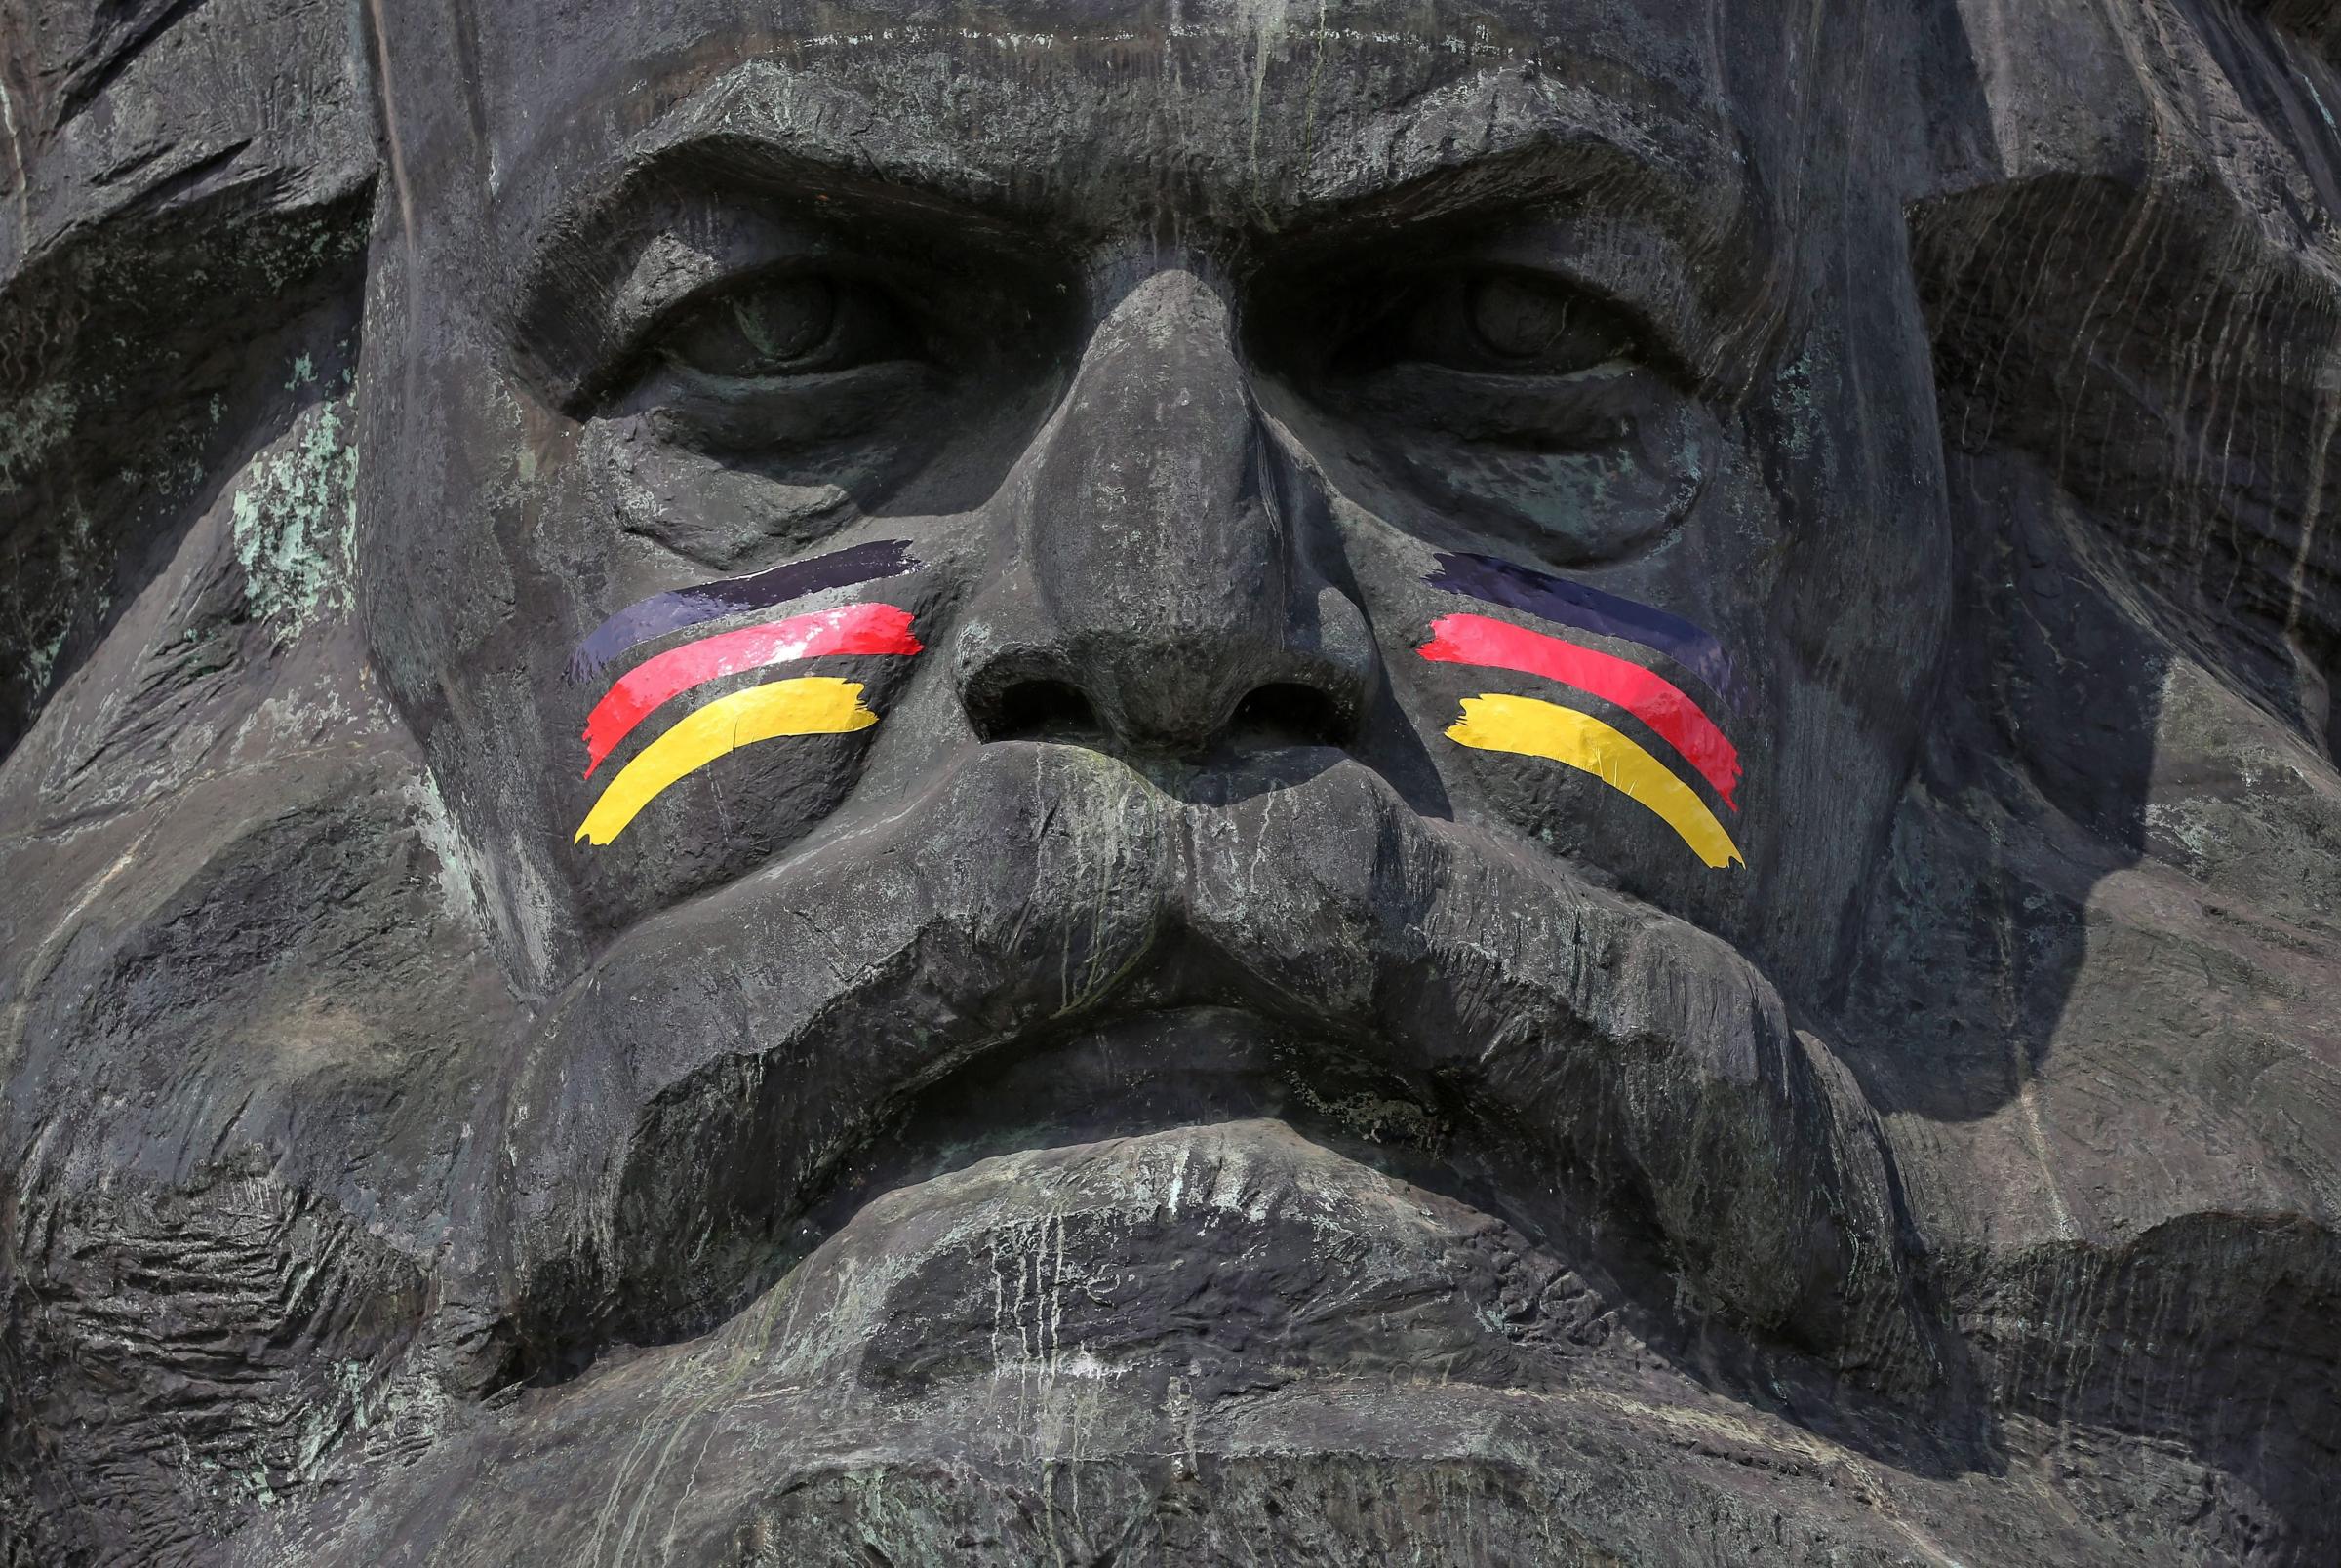 The Karl Marx monument has been decorated with German flags painted on his cheeks in Chemnitz, Germany on June 16, 2014.